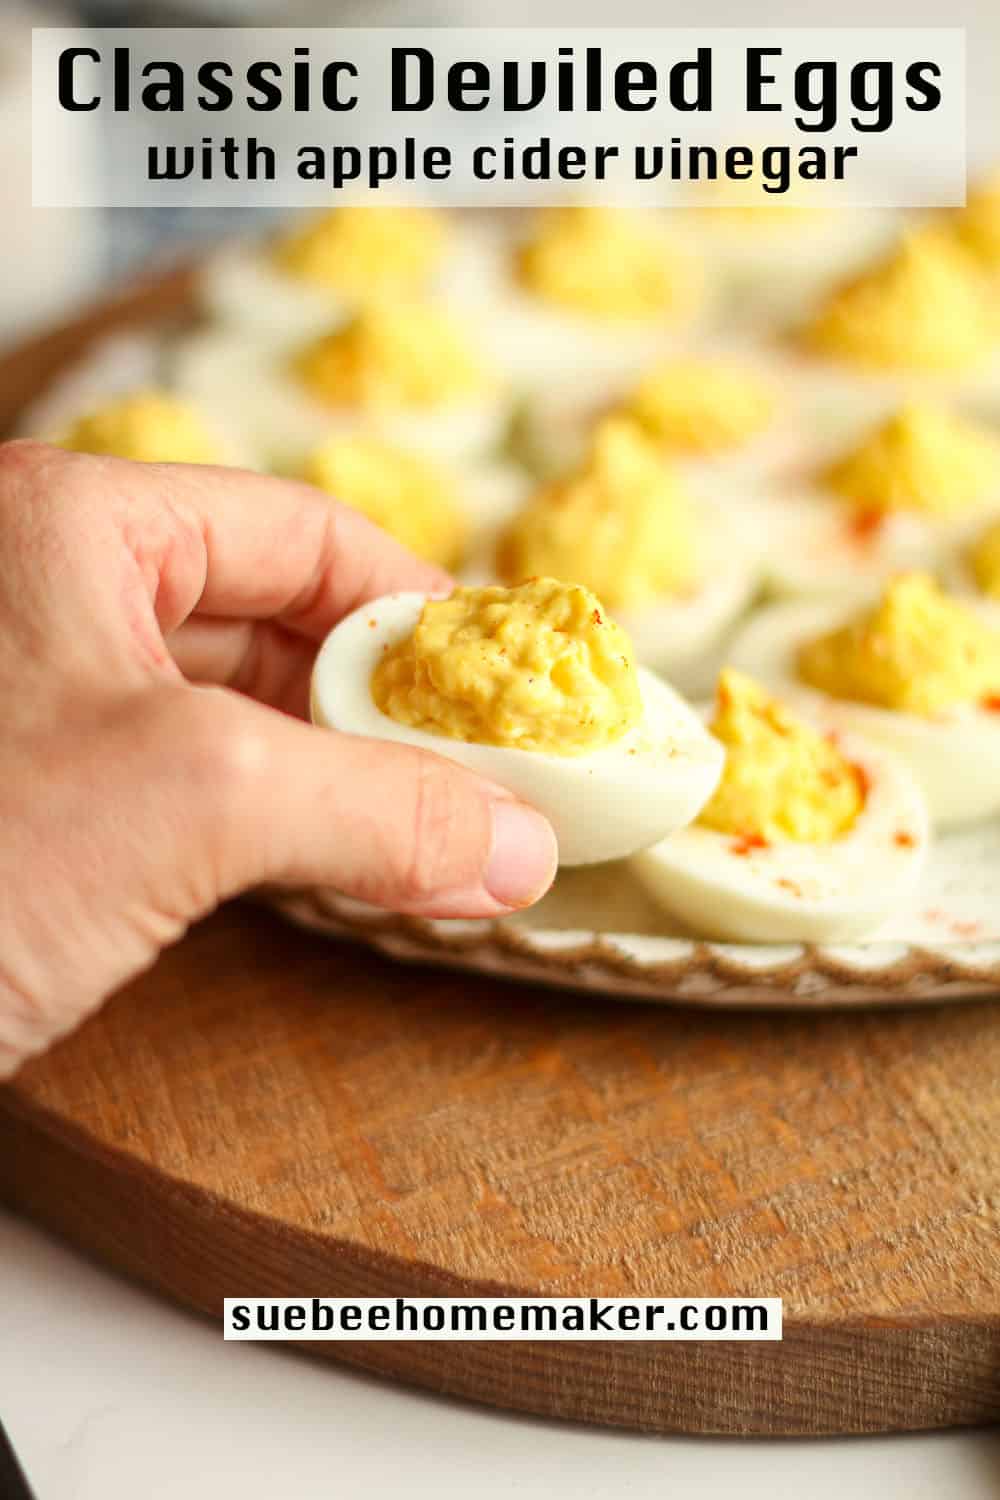 My hand reaching for a deviled egg above a plate of eggs.